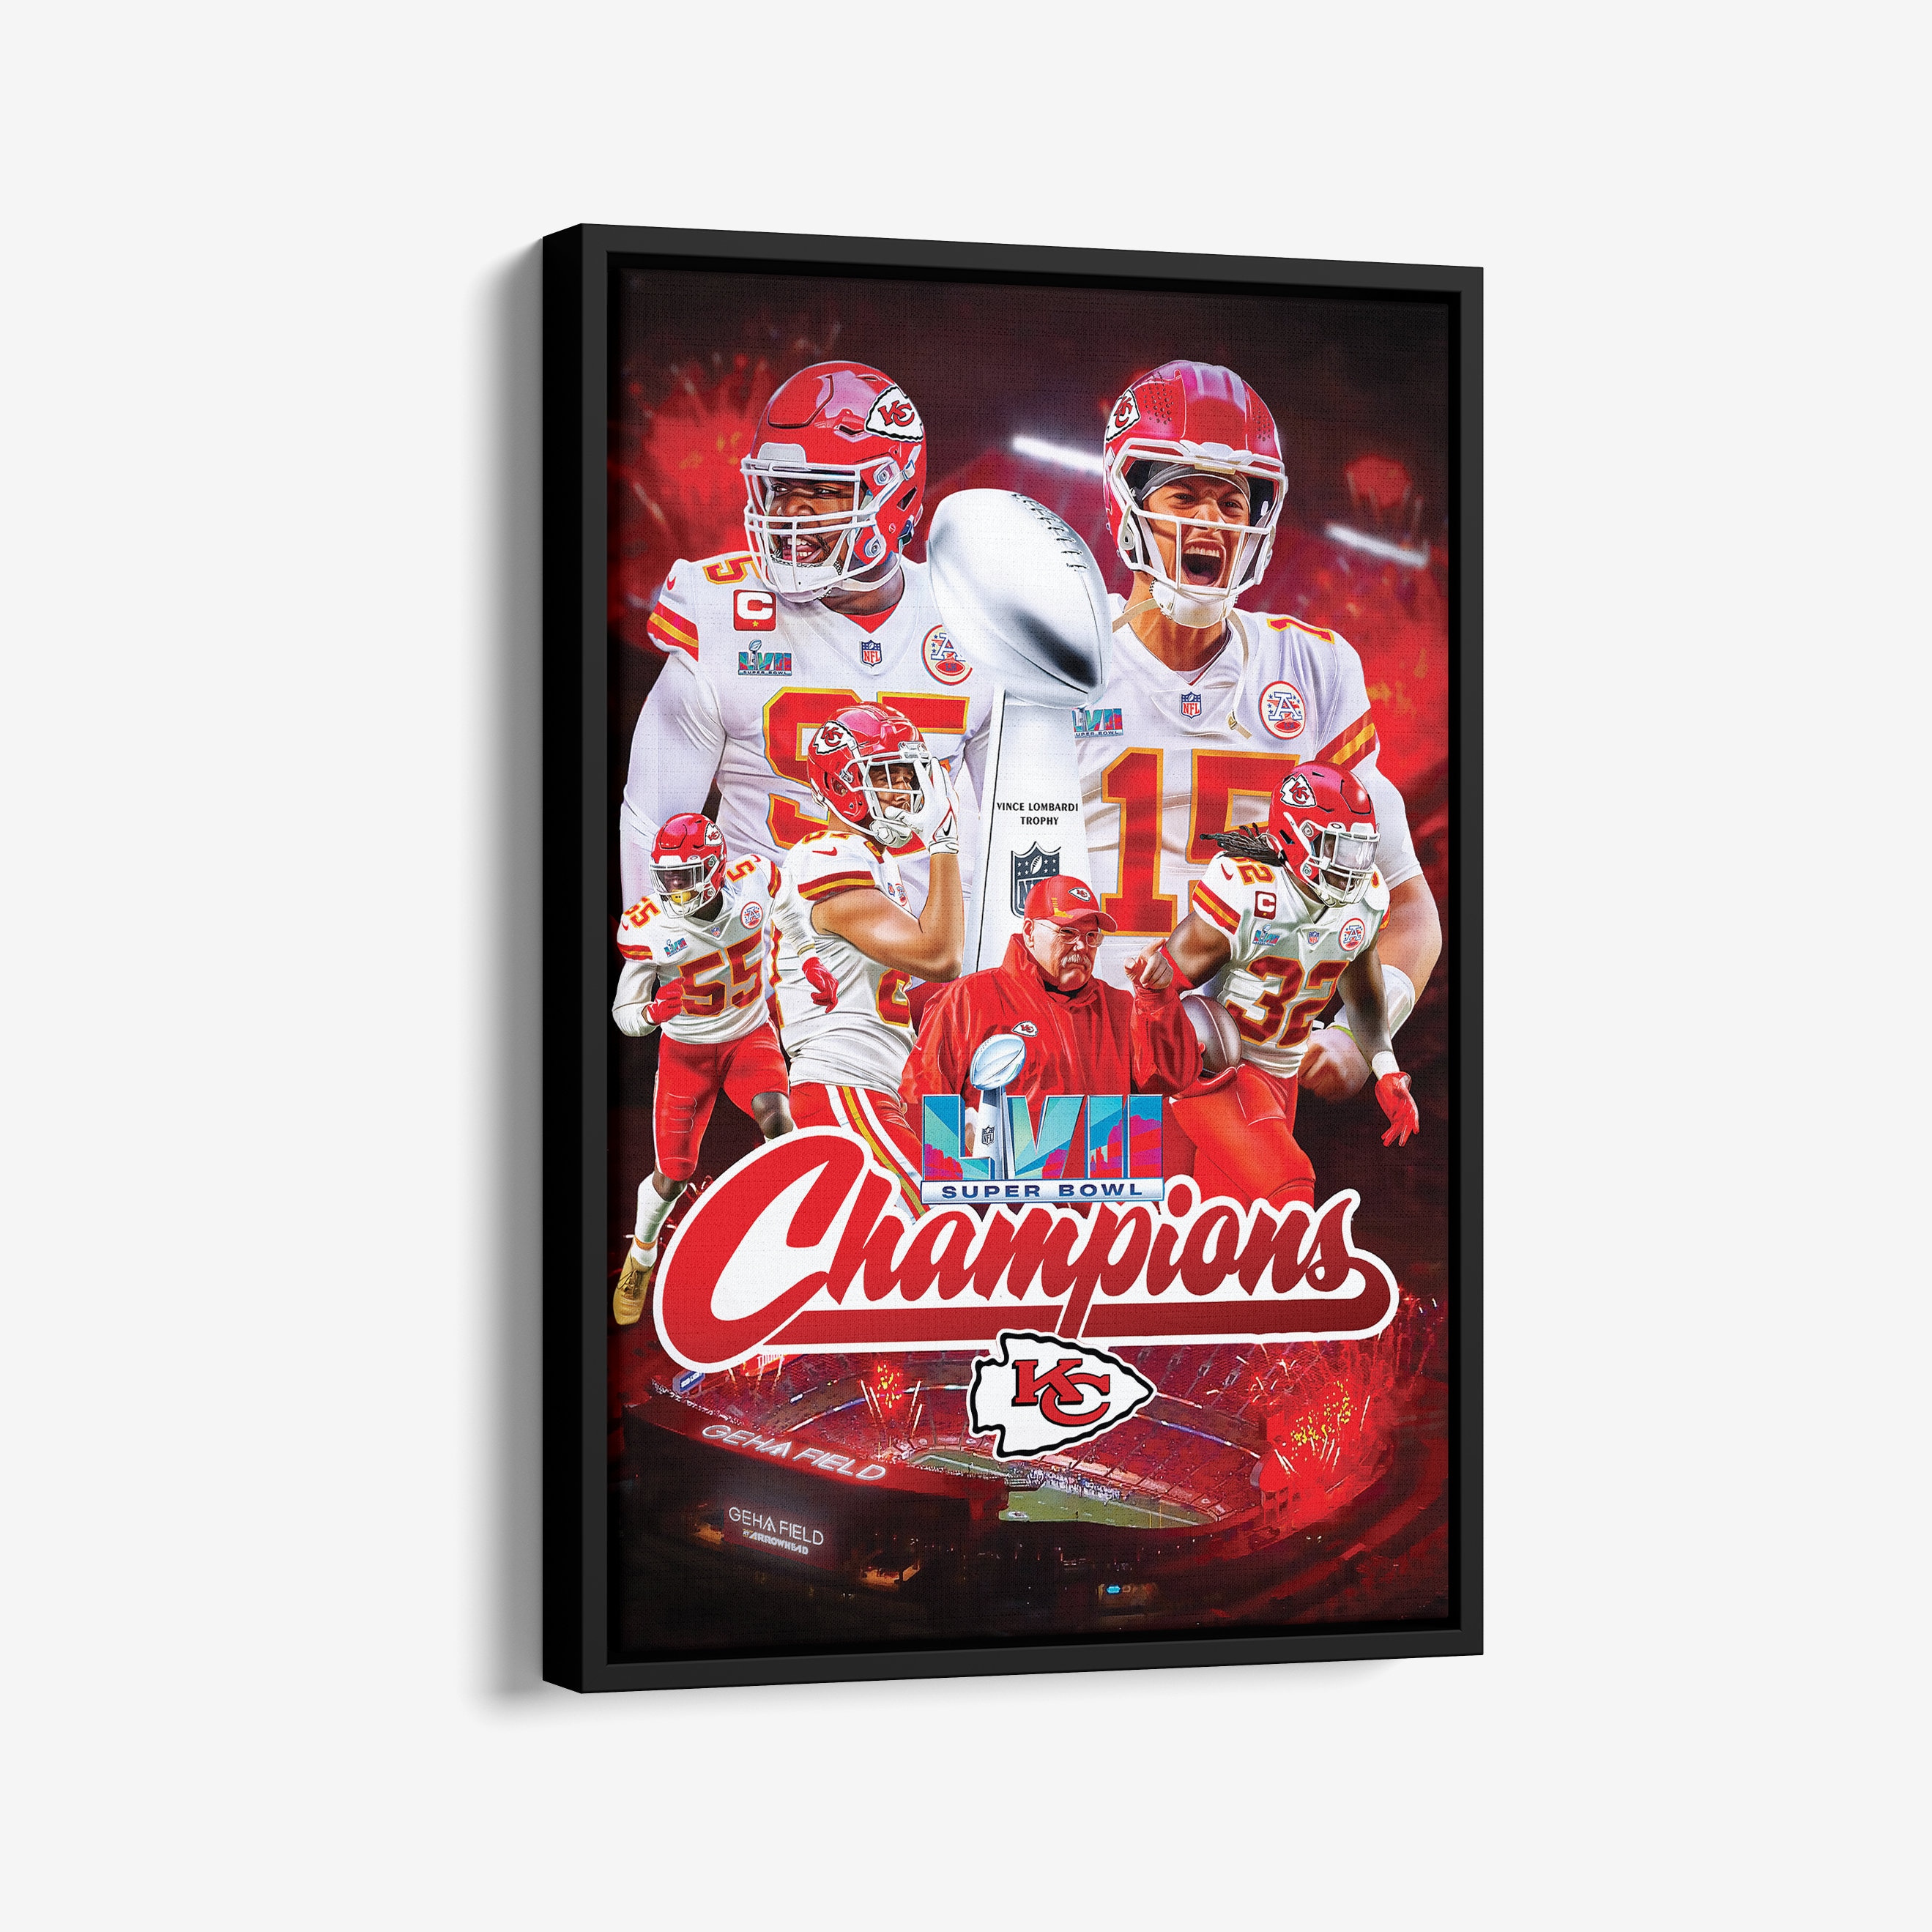 Tampa Bay Buccaneers Framed 23 x 27 Super Bowl LV Champions Floating Ticket Collage